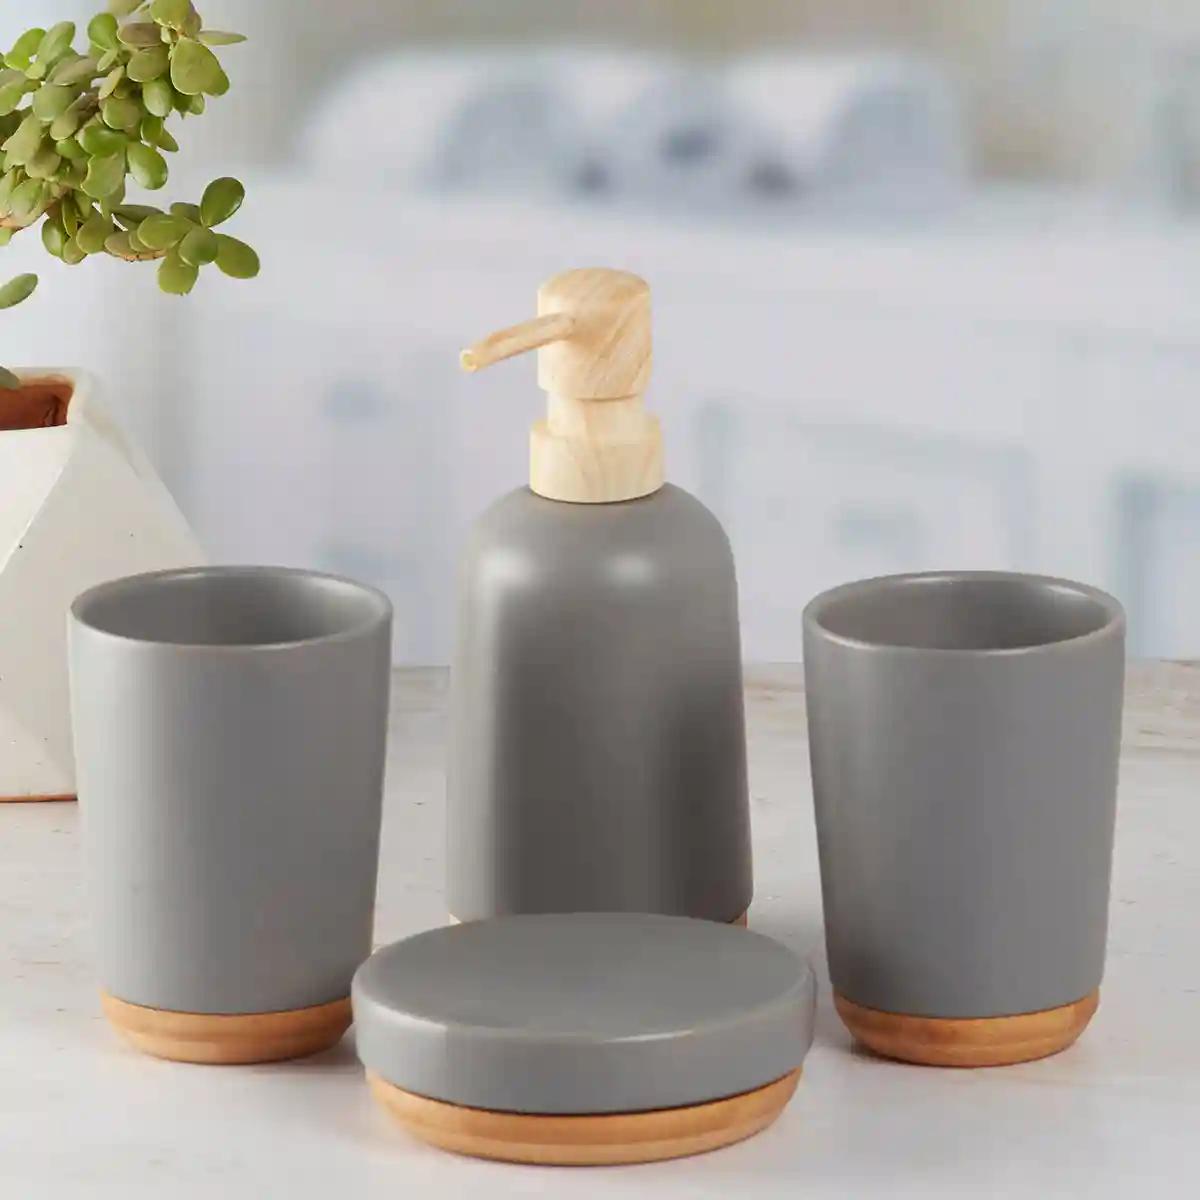 Kookee Ceramic Bathroom Accessories Set of 4, Modern Bath Set with Liquid handwash Soap Dispenser and Toothbrush holder, Luxury Gift Accessory for Home - Grey (9625)